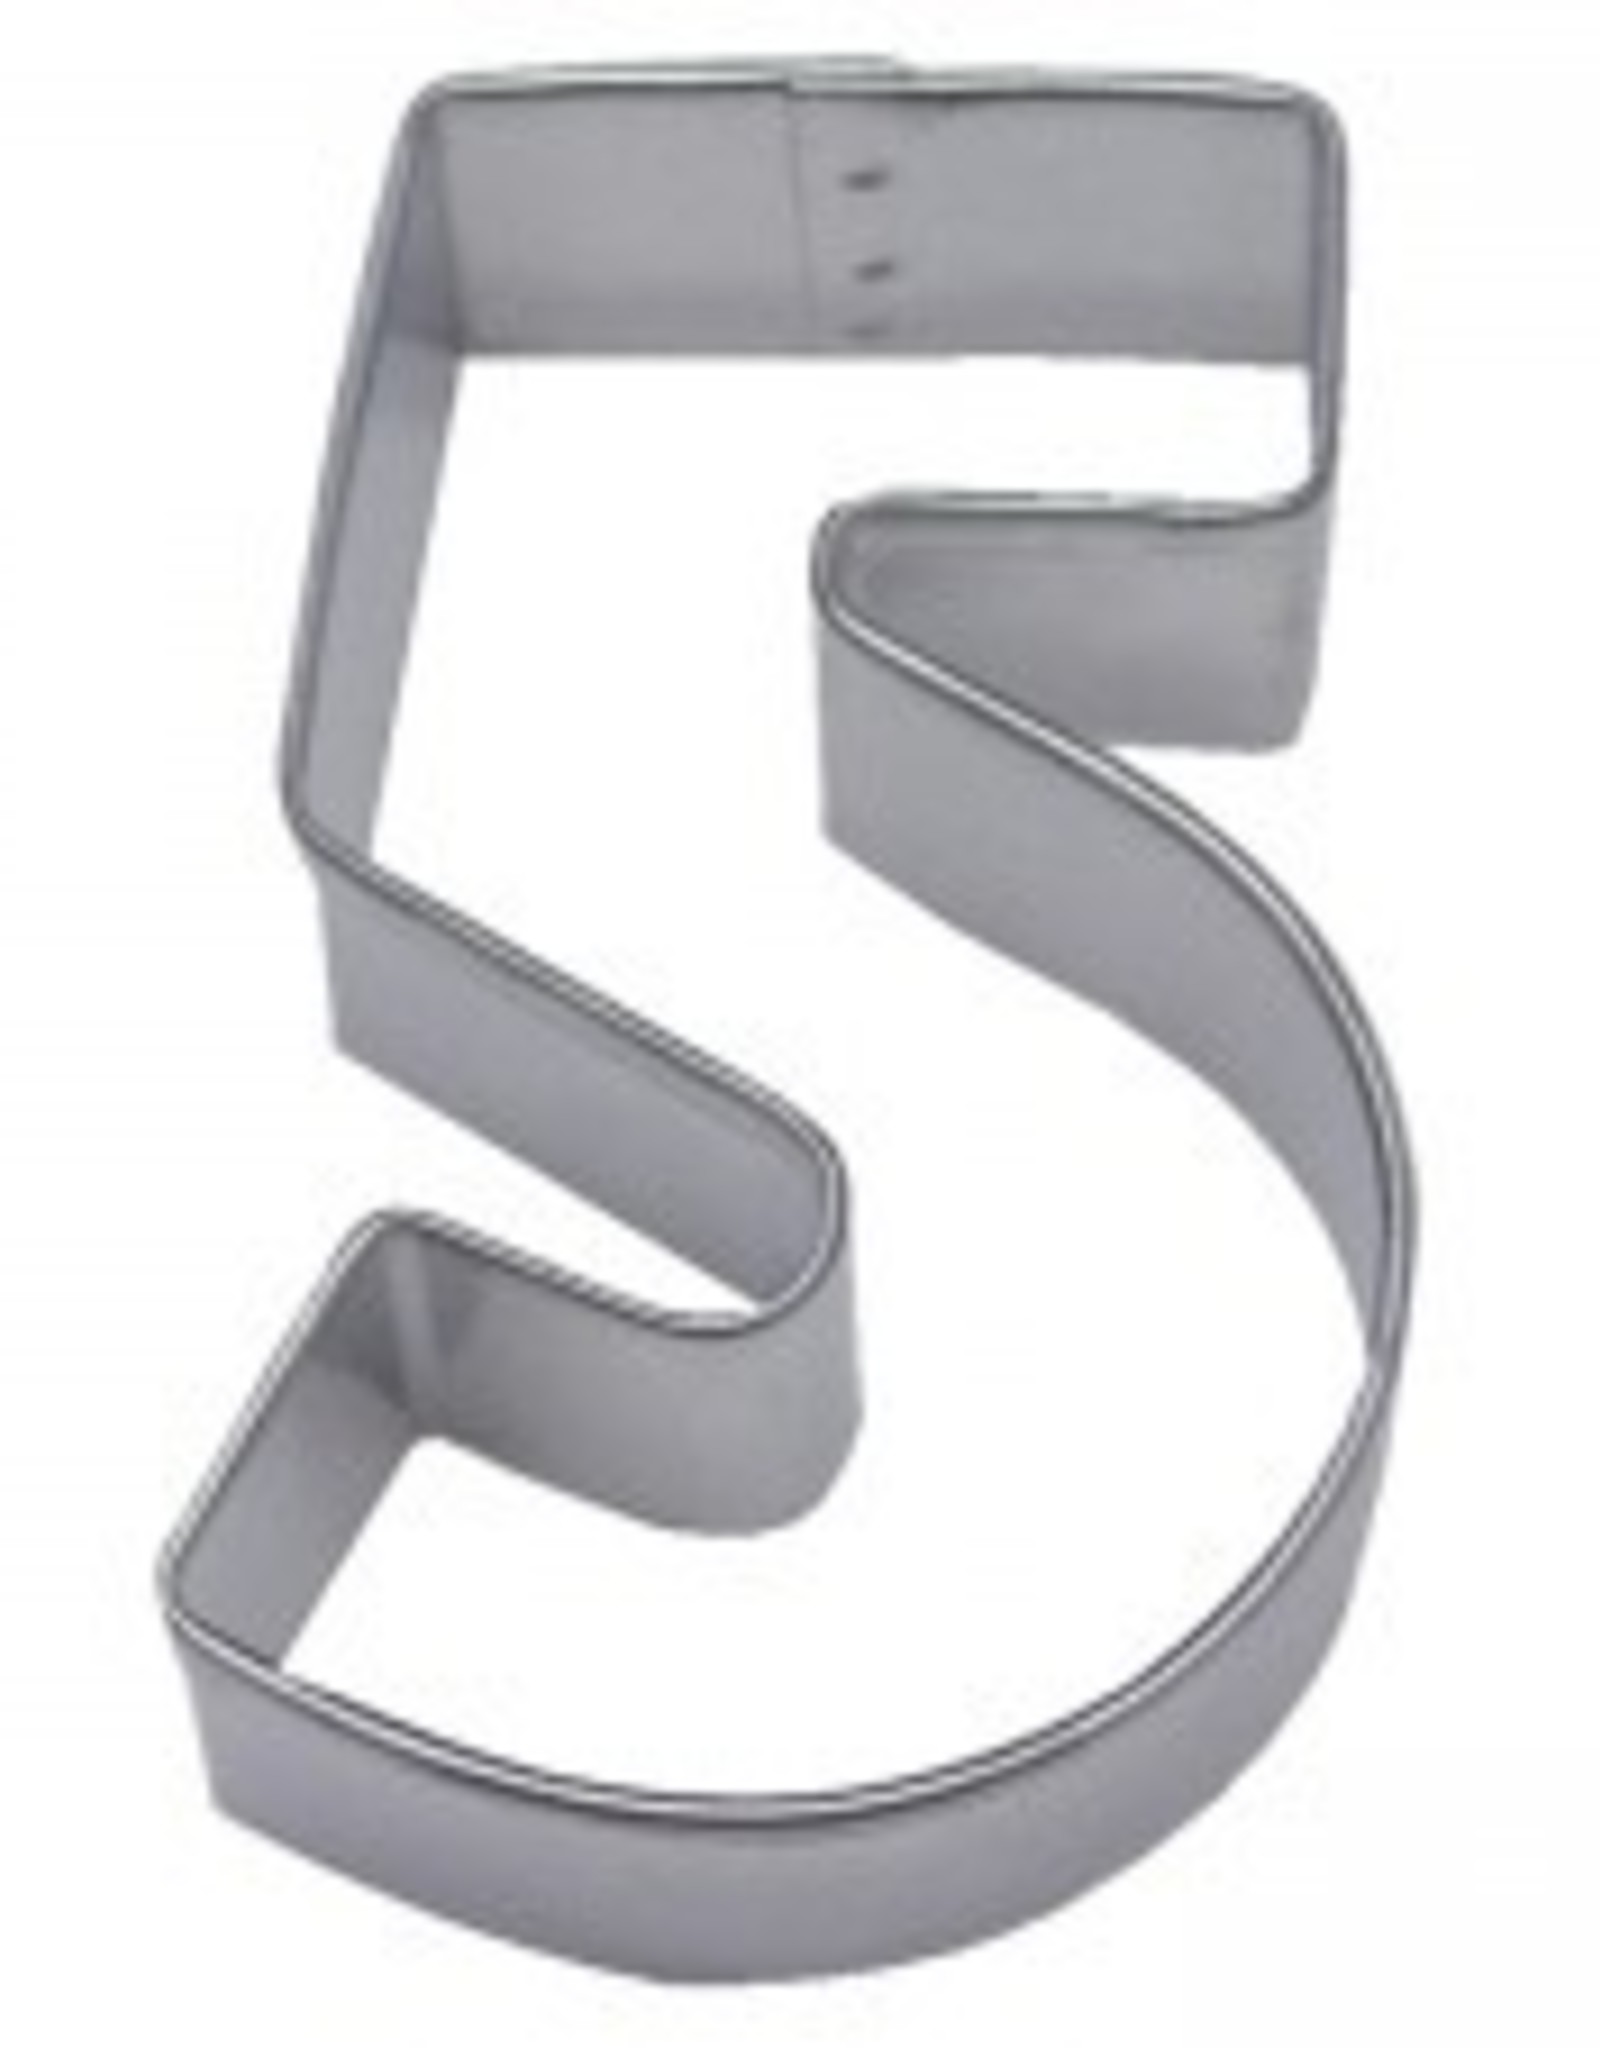 Number "5" Cookie Cutter